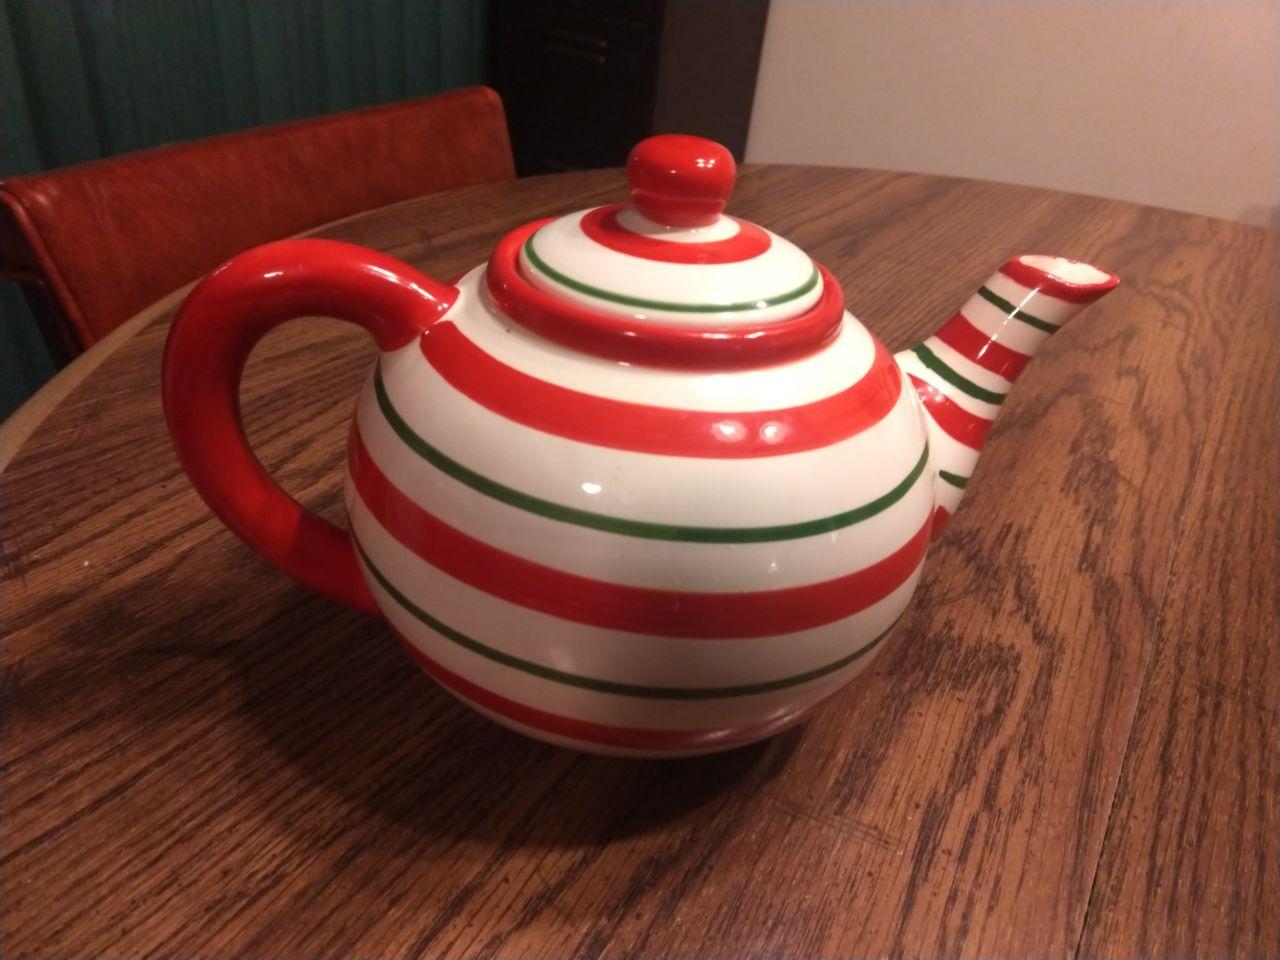 A striped teapot that I found at a thrift store.